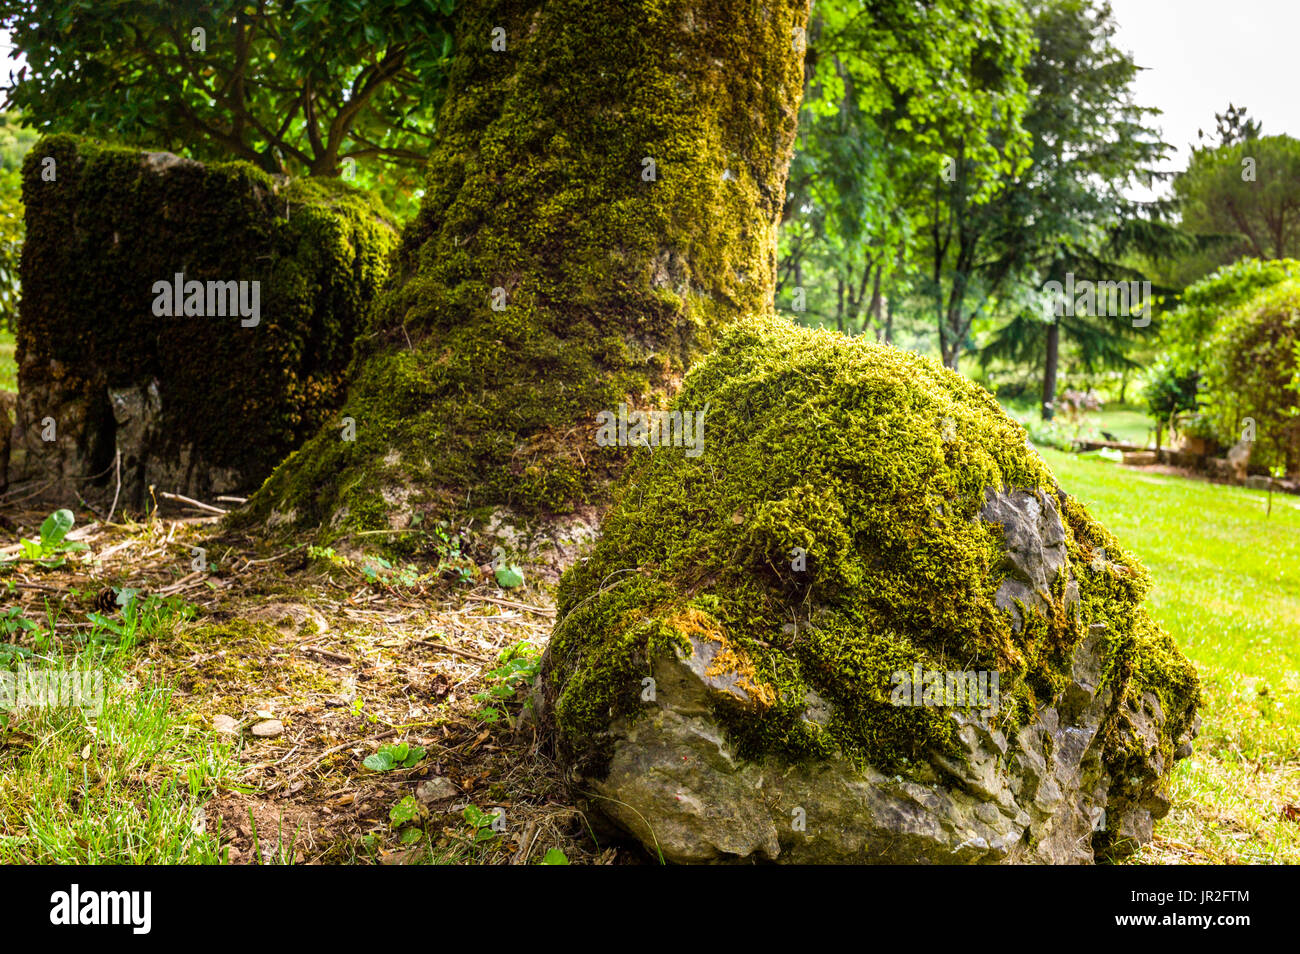 Moss covered rock and tree trunk in an old garden Stock Photo